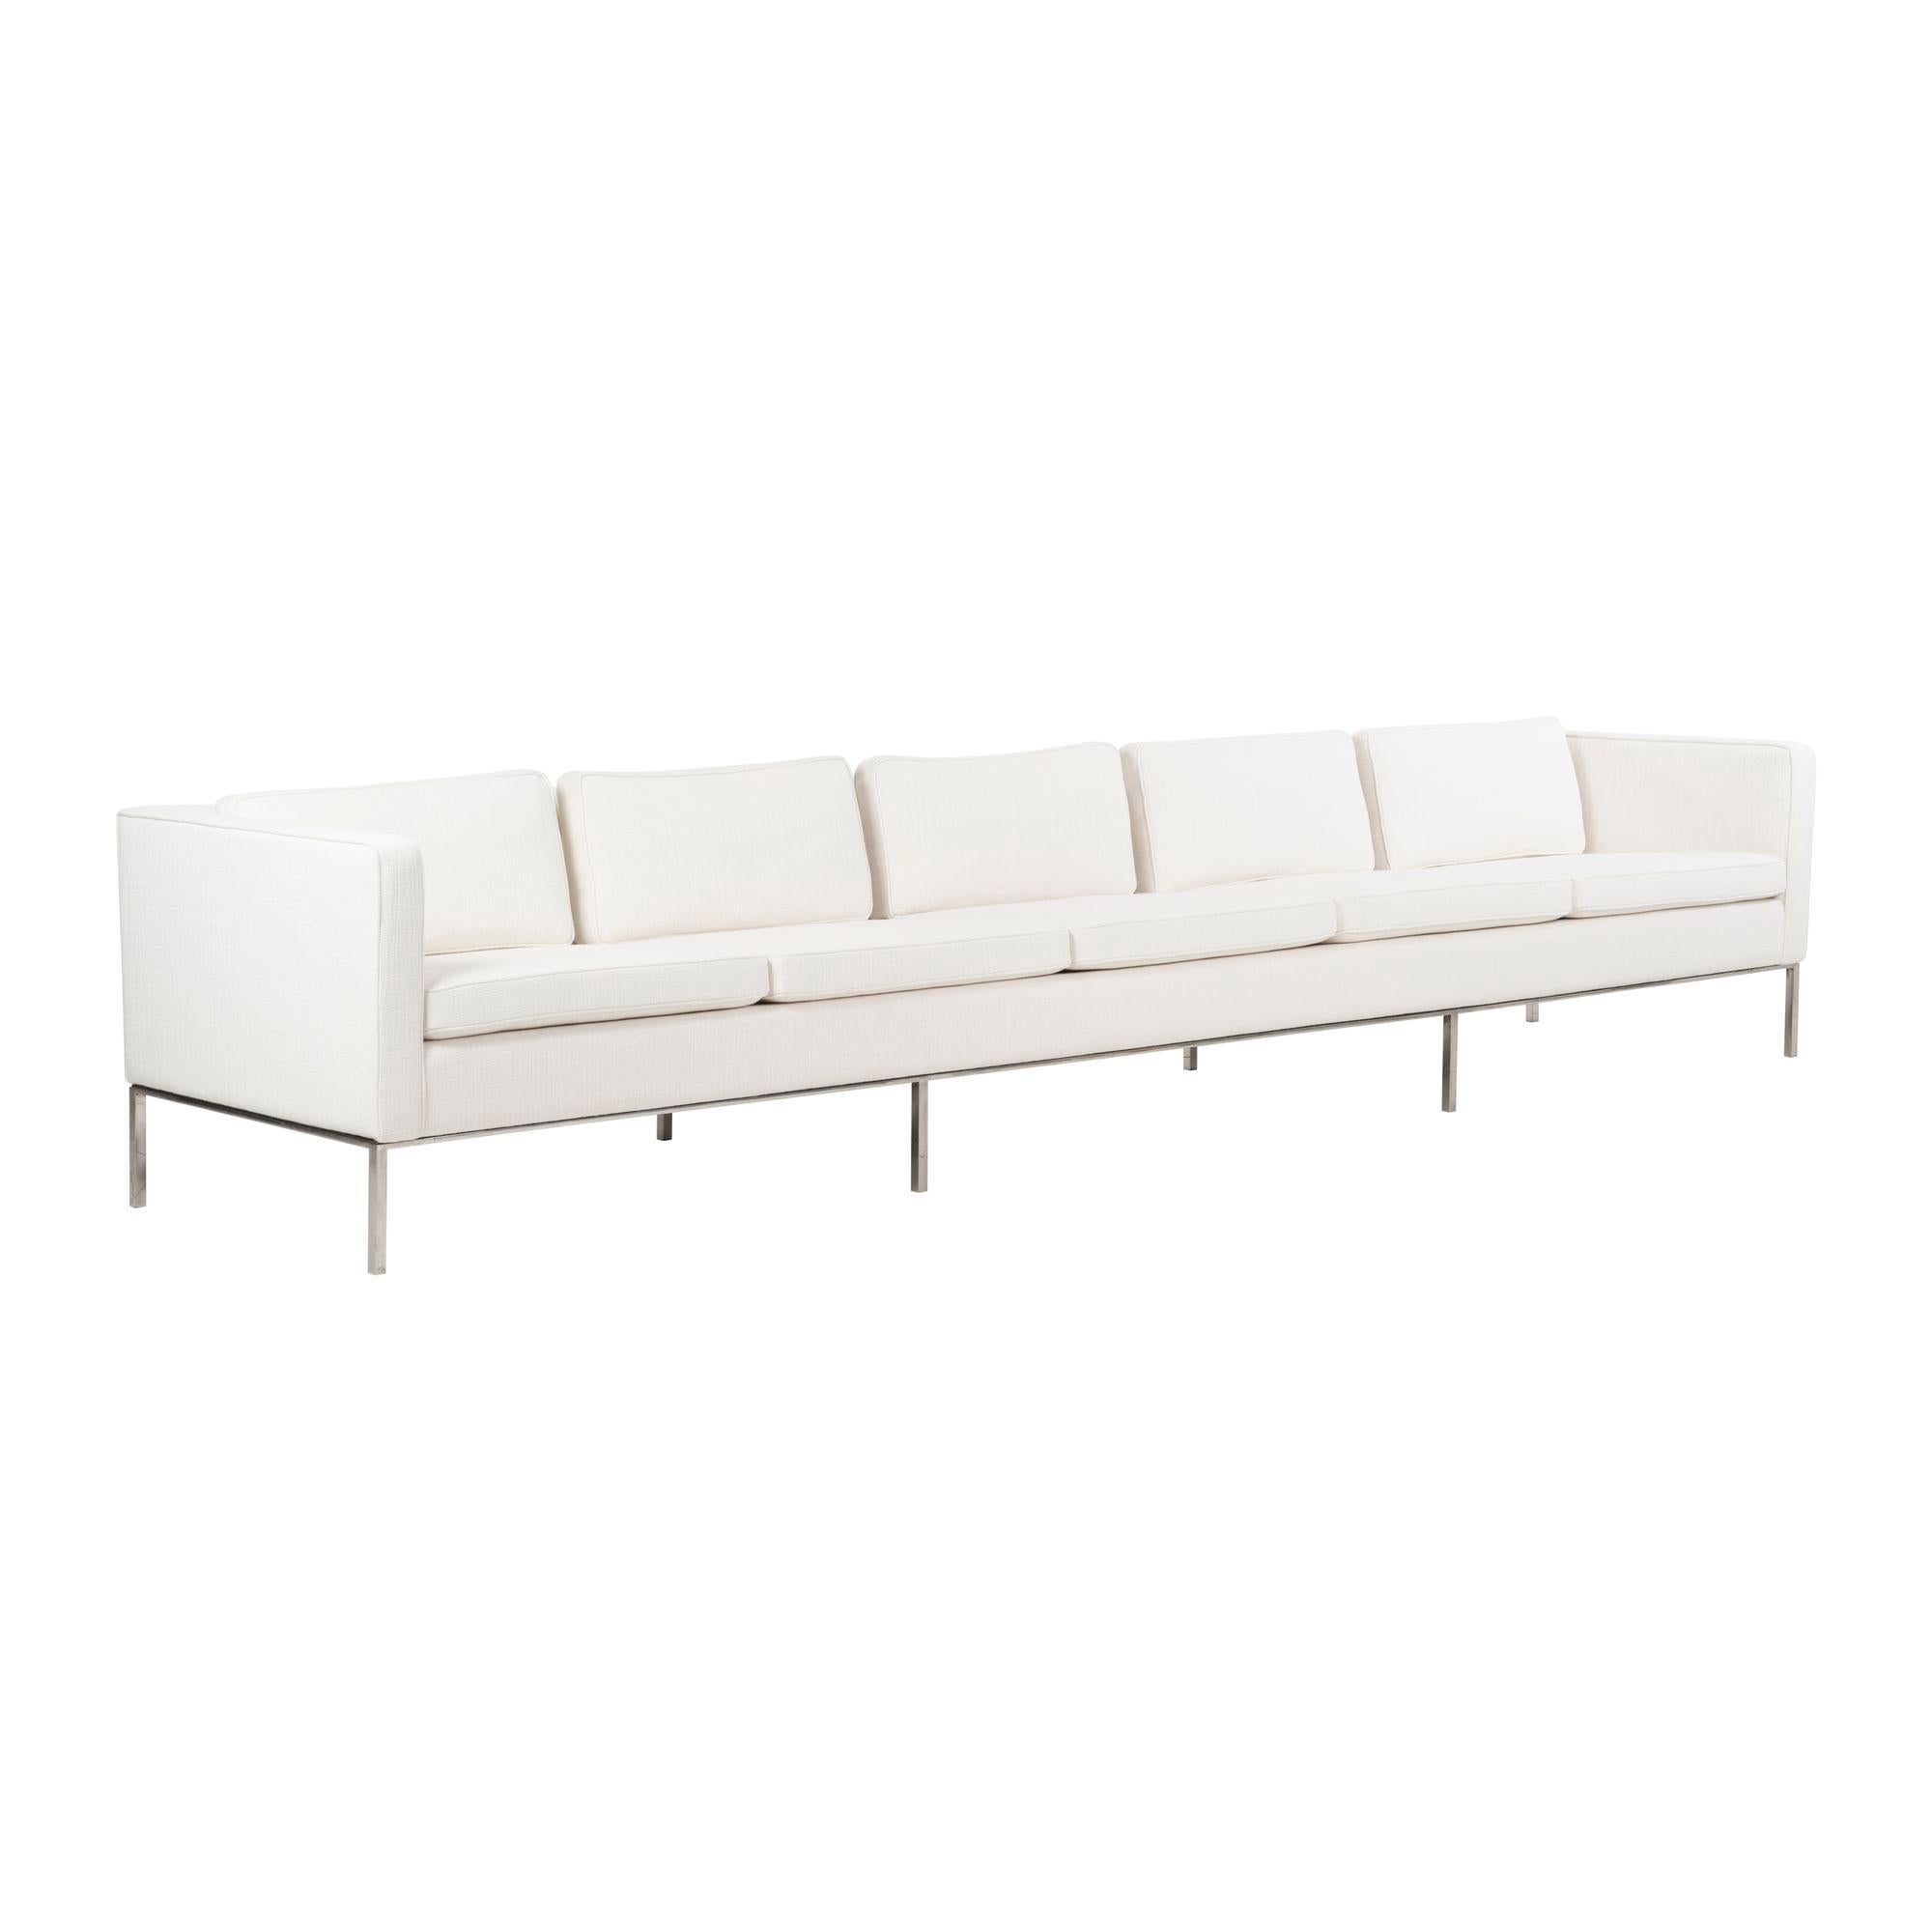 William Armbruster Monumental Five-Seat Sofa for Chase Manhattan Executive Offic For Sale 5